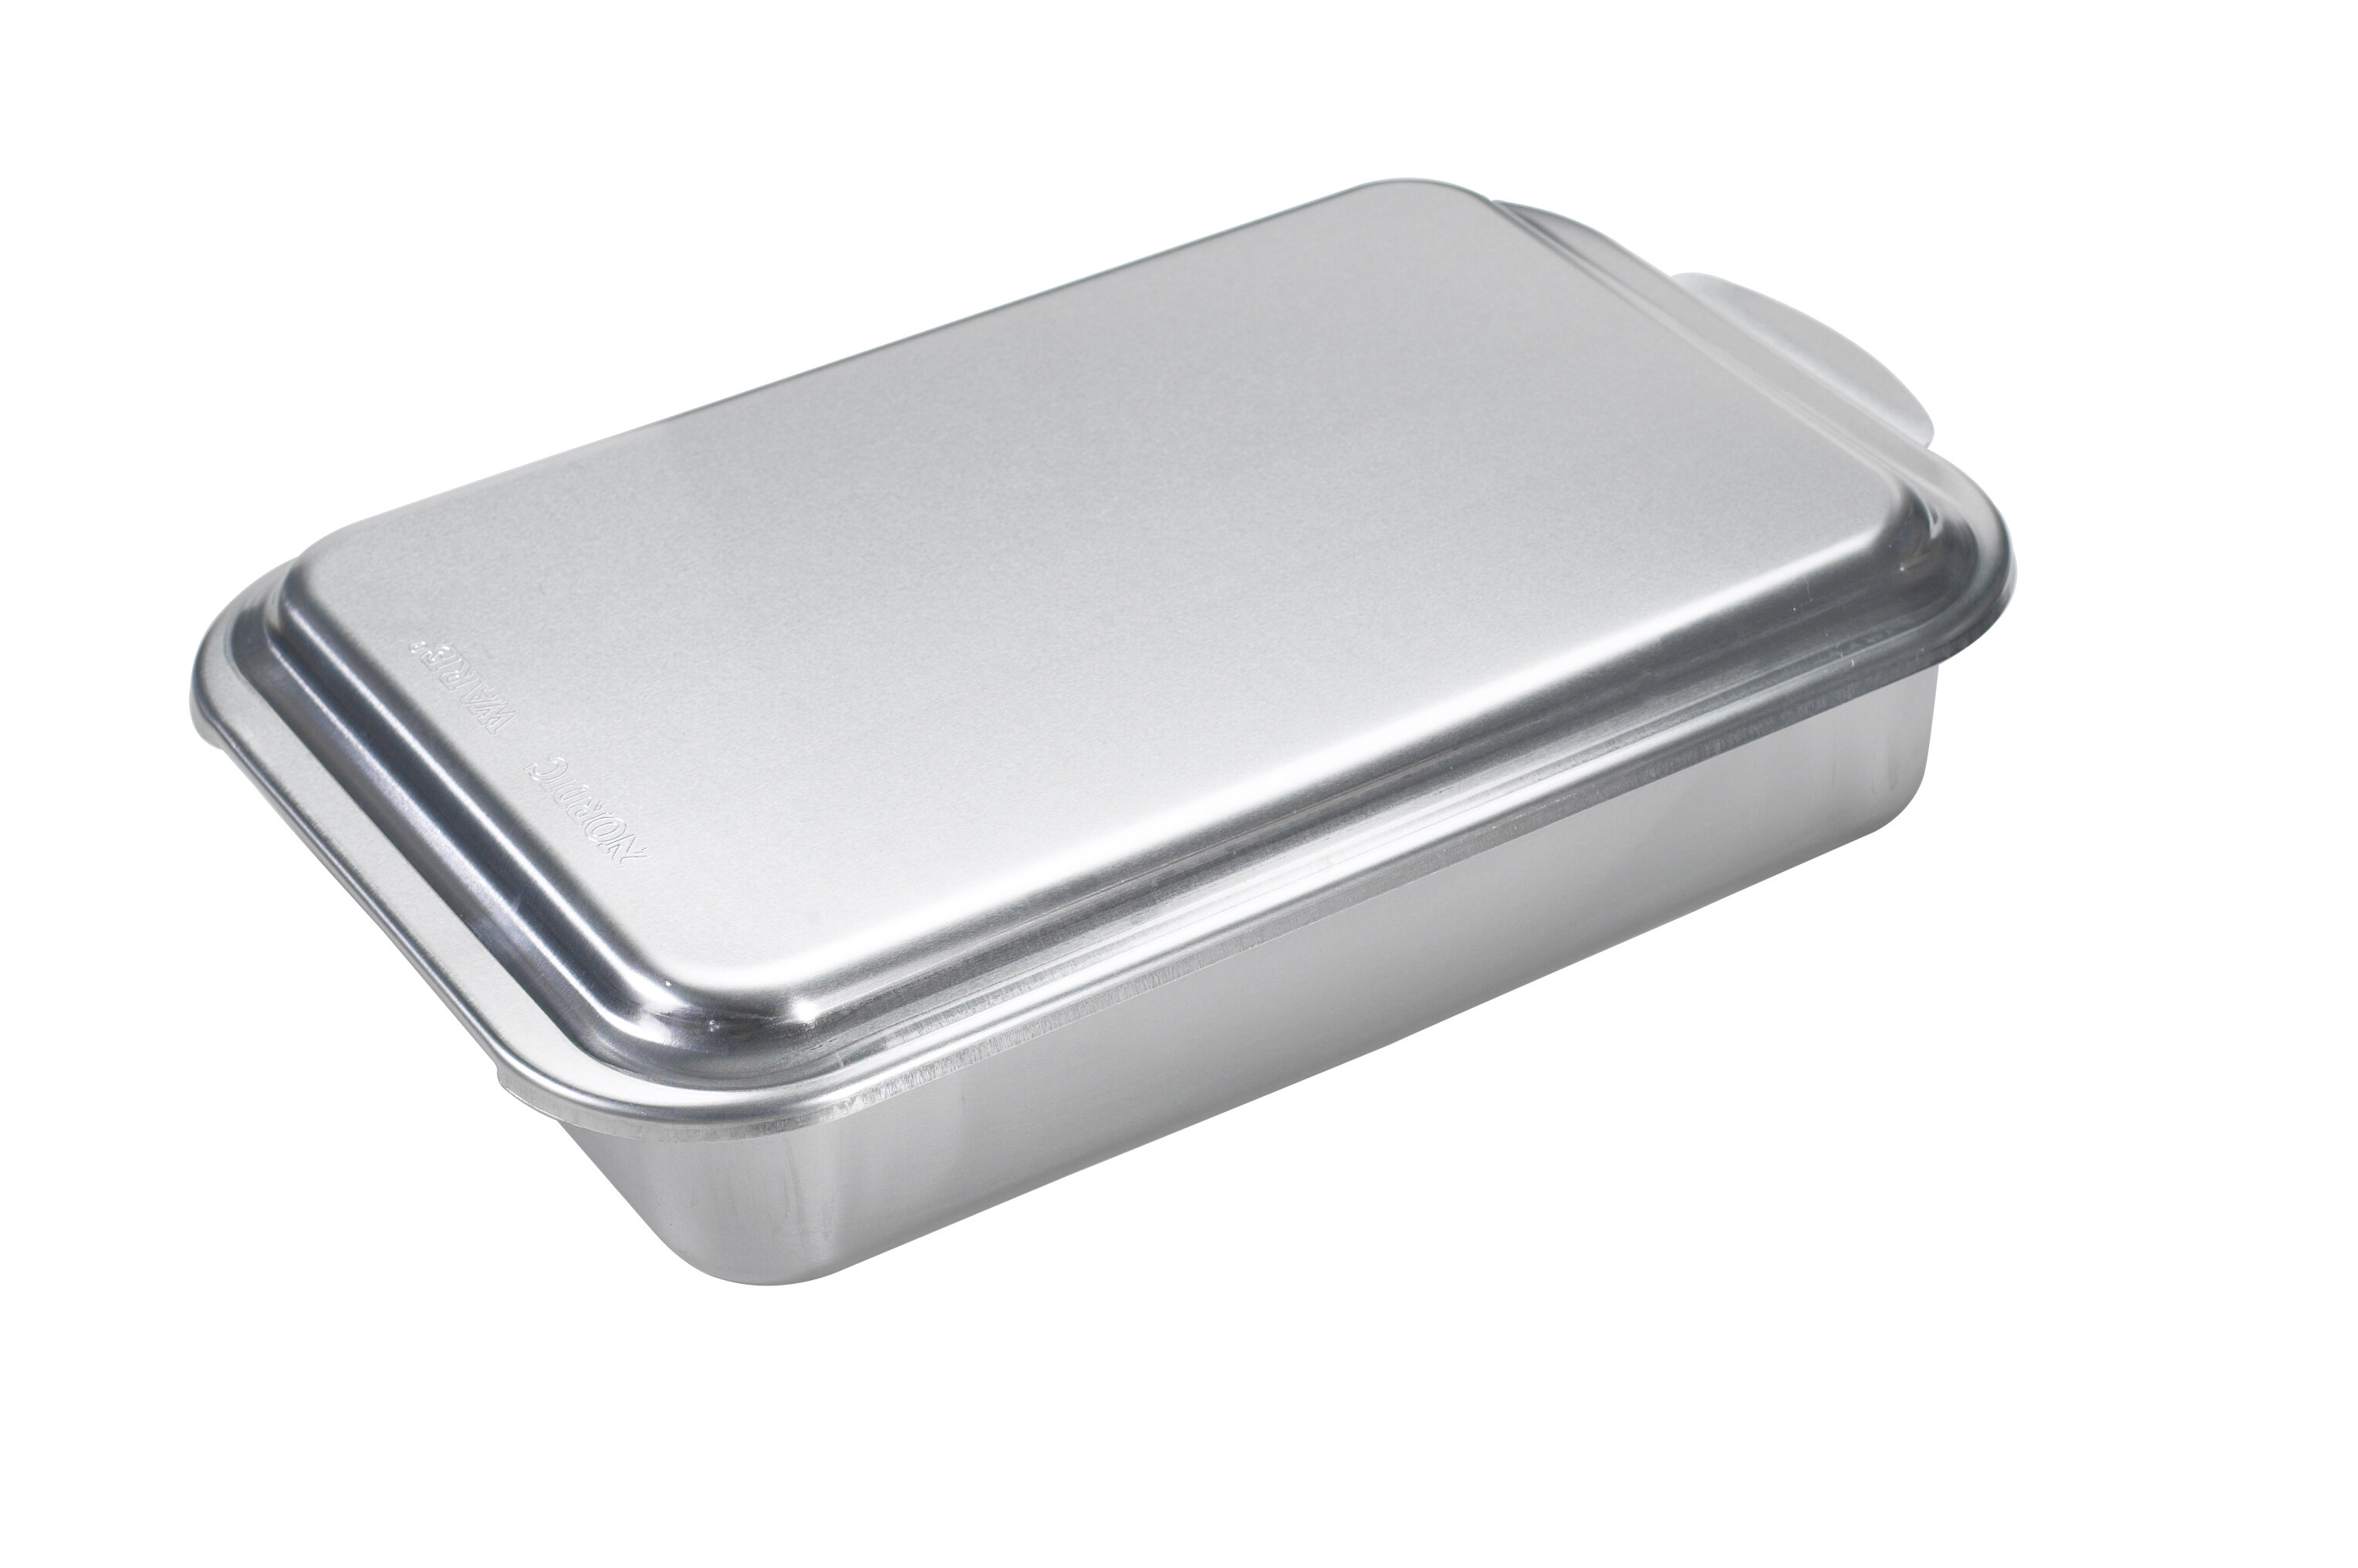 Nordic Ware - Nordic Ware Naturals Aluminum Commercial 8 x 8 Square Cake  Pan, 8 by 8 inches, Silver 